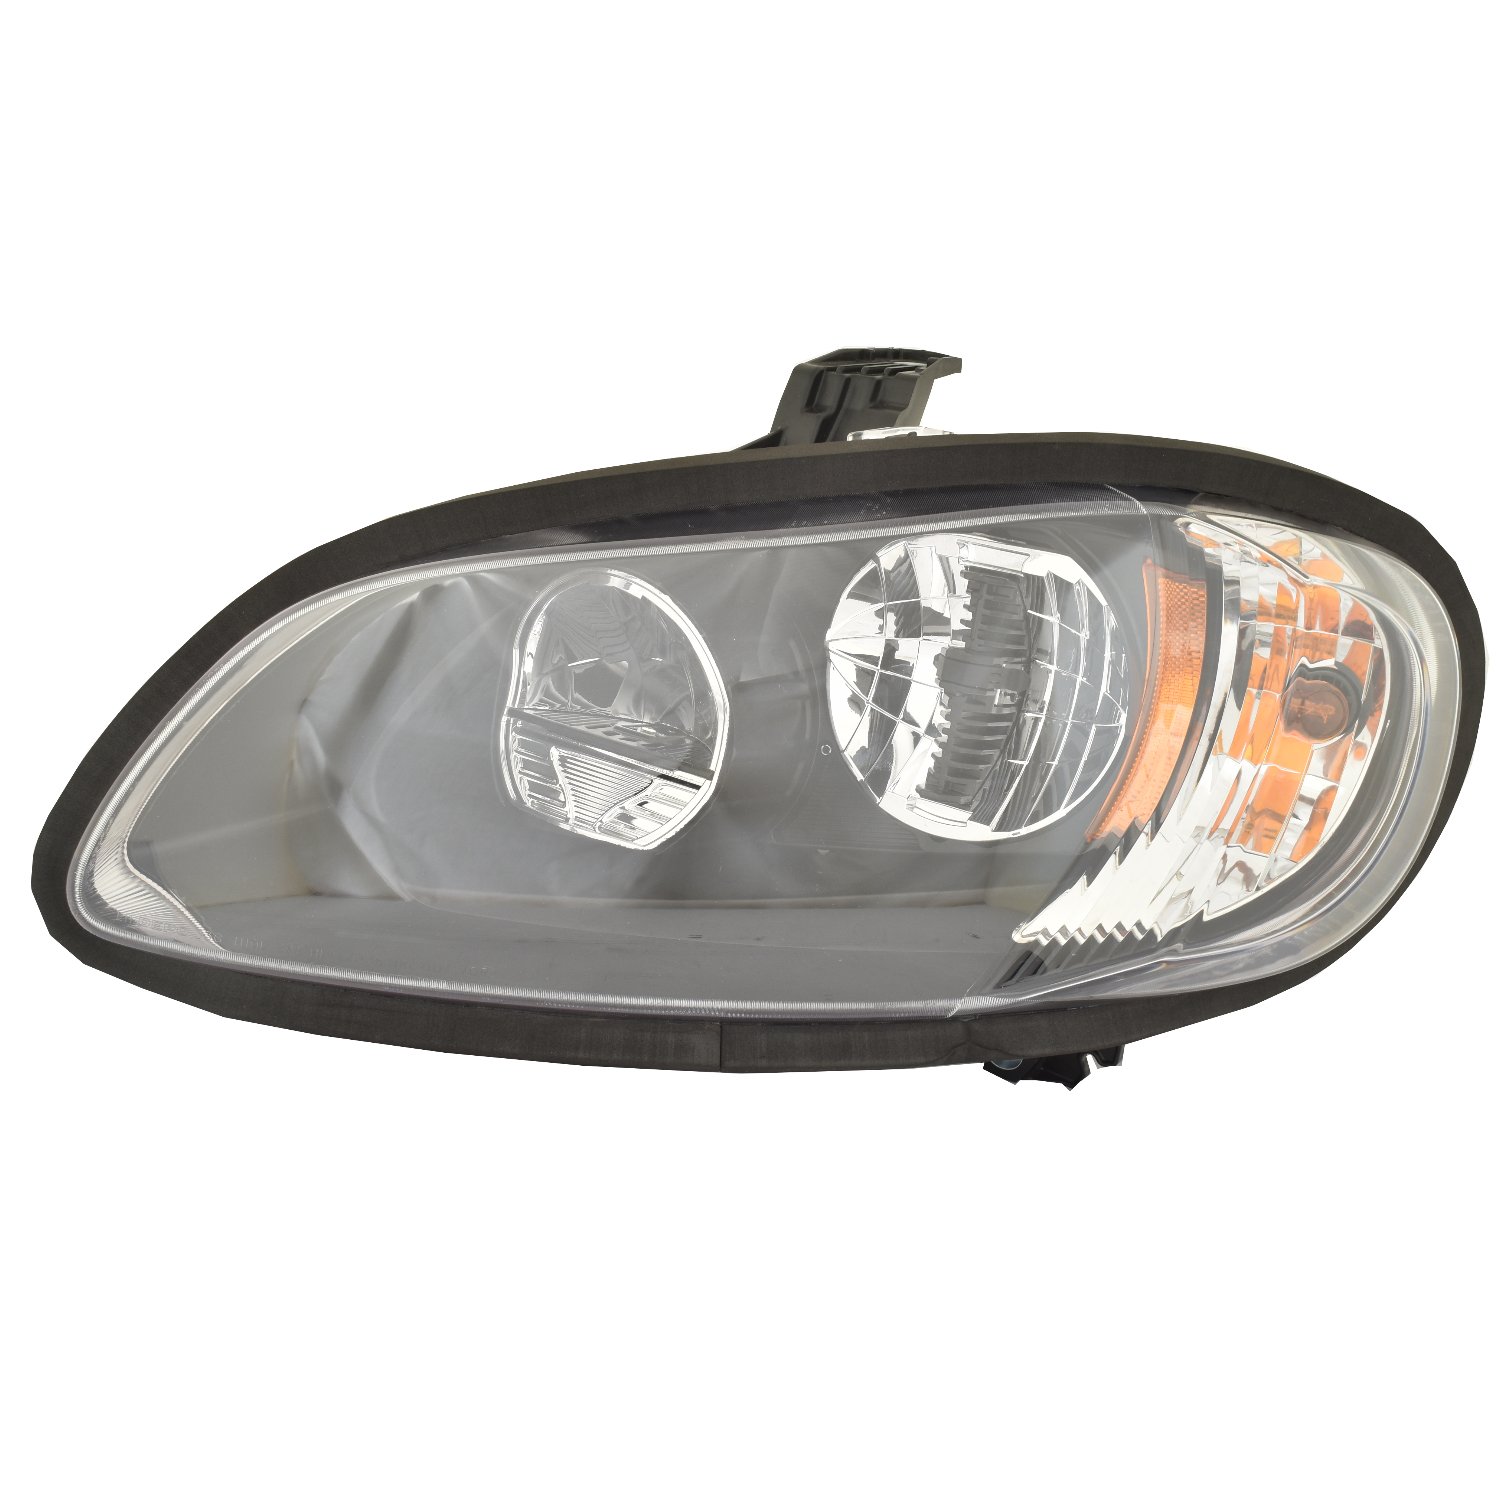 Depo 336-1606R-AS1 Pontiac Solstice Passenger Side Replacement Parking/Signal Light Assembly 02-00-336-1606R-AS1